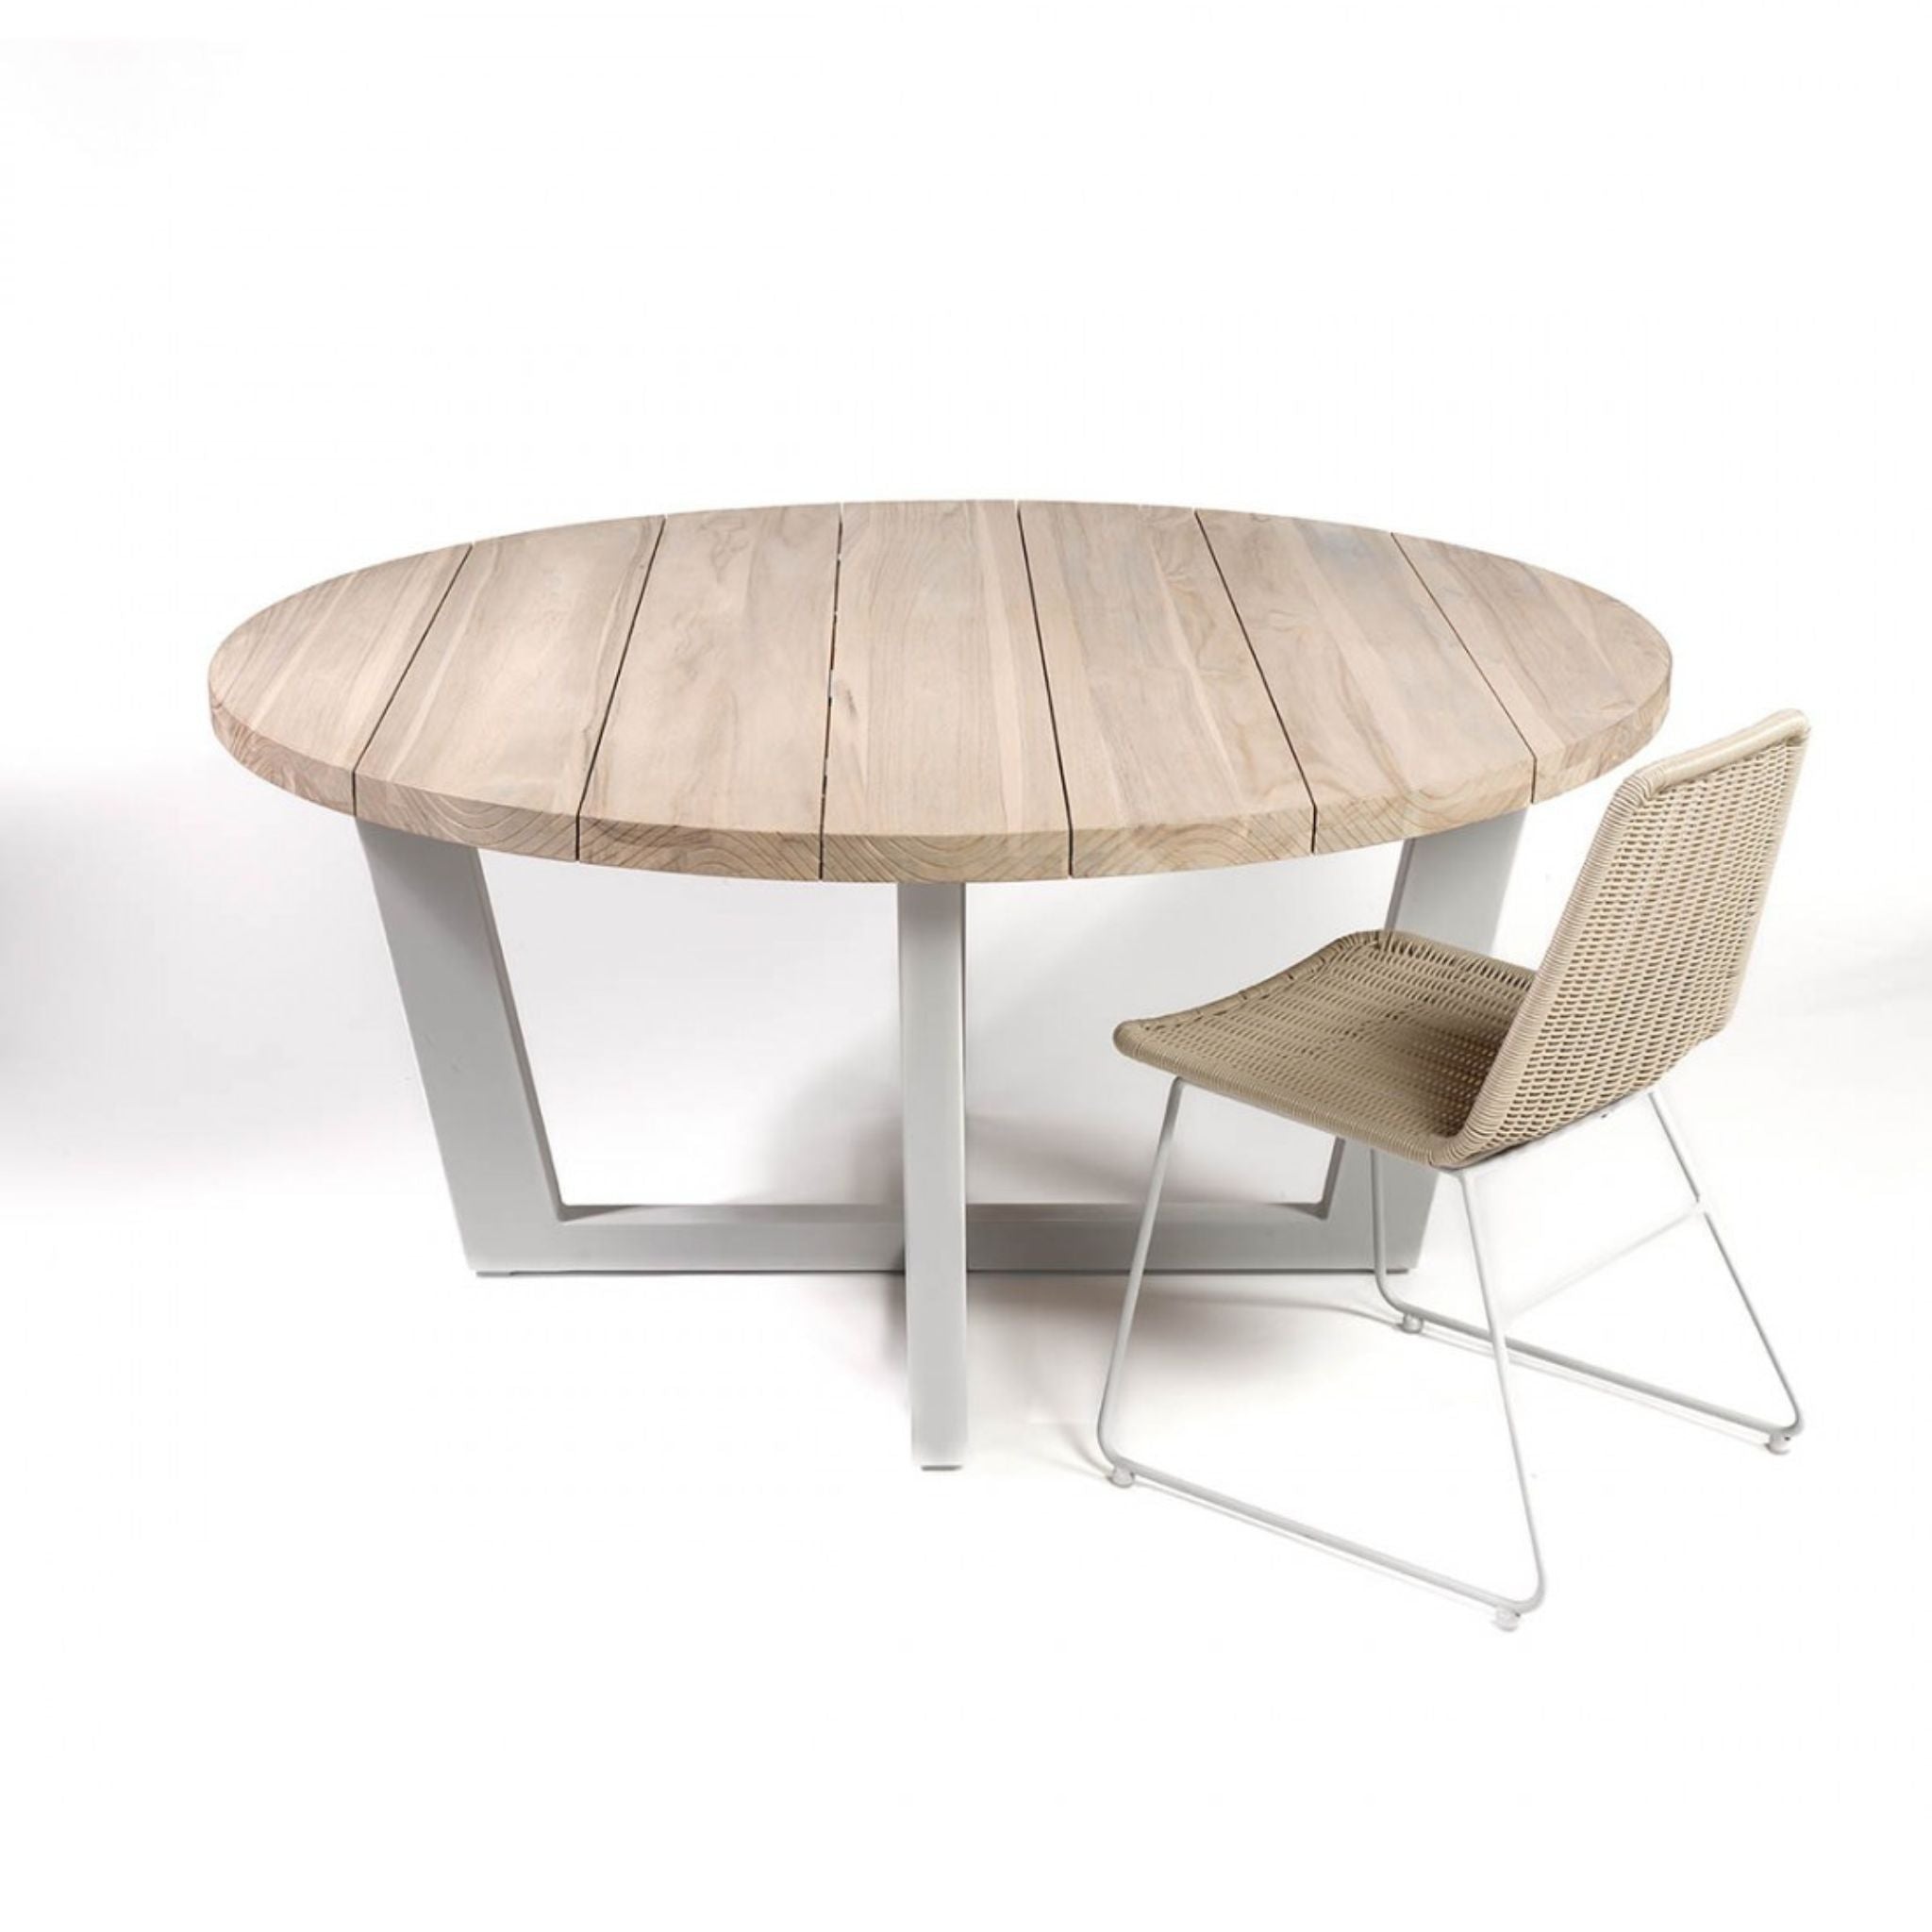 Crisal Decoracion Ivory Round Wooden Outdoor Dining Table with Taupe Tone Metal Leg - ModernistaLiving